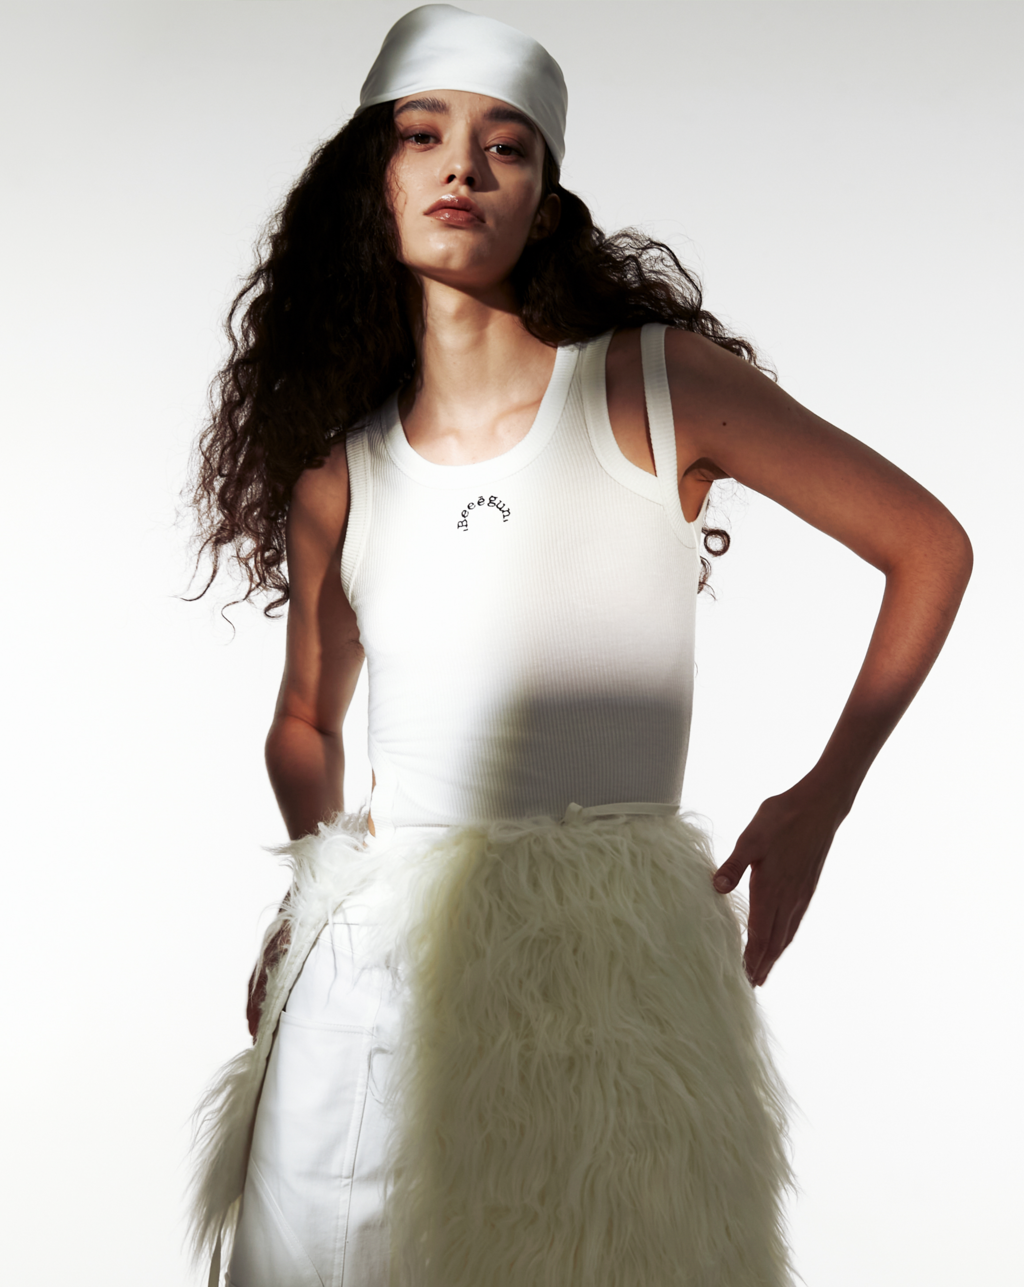 [ECO-FRIENDLY] CUT-OUT SLEEVELESS, WHITE